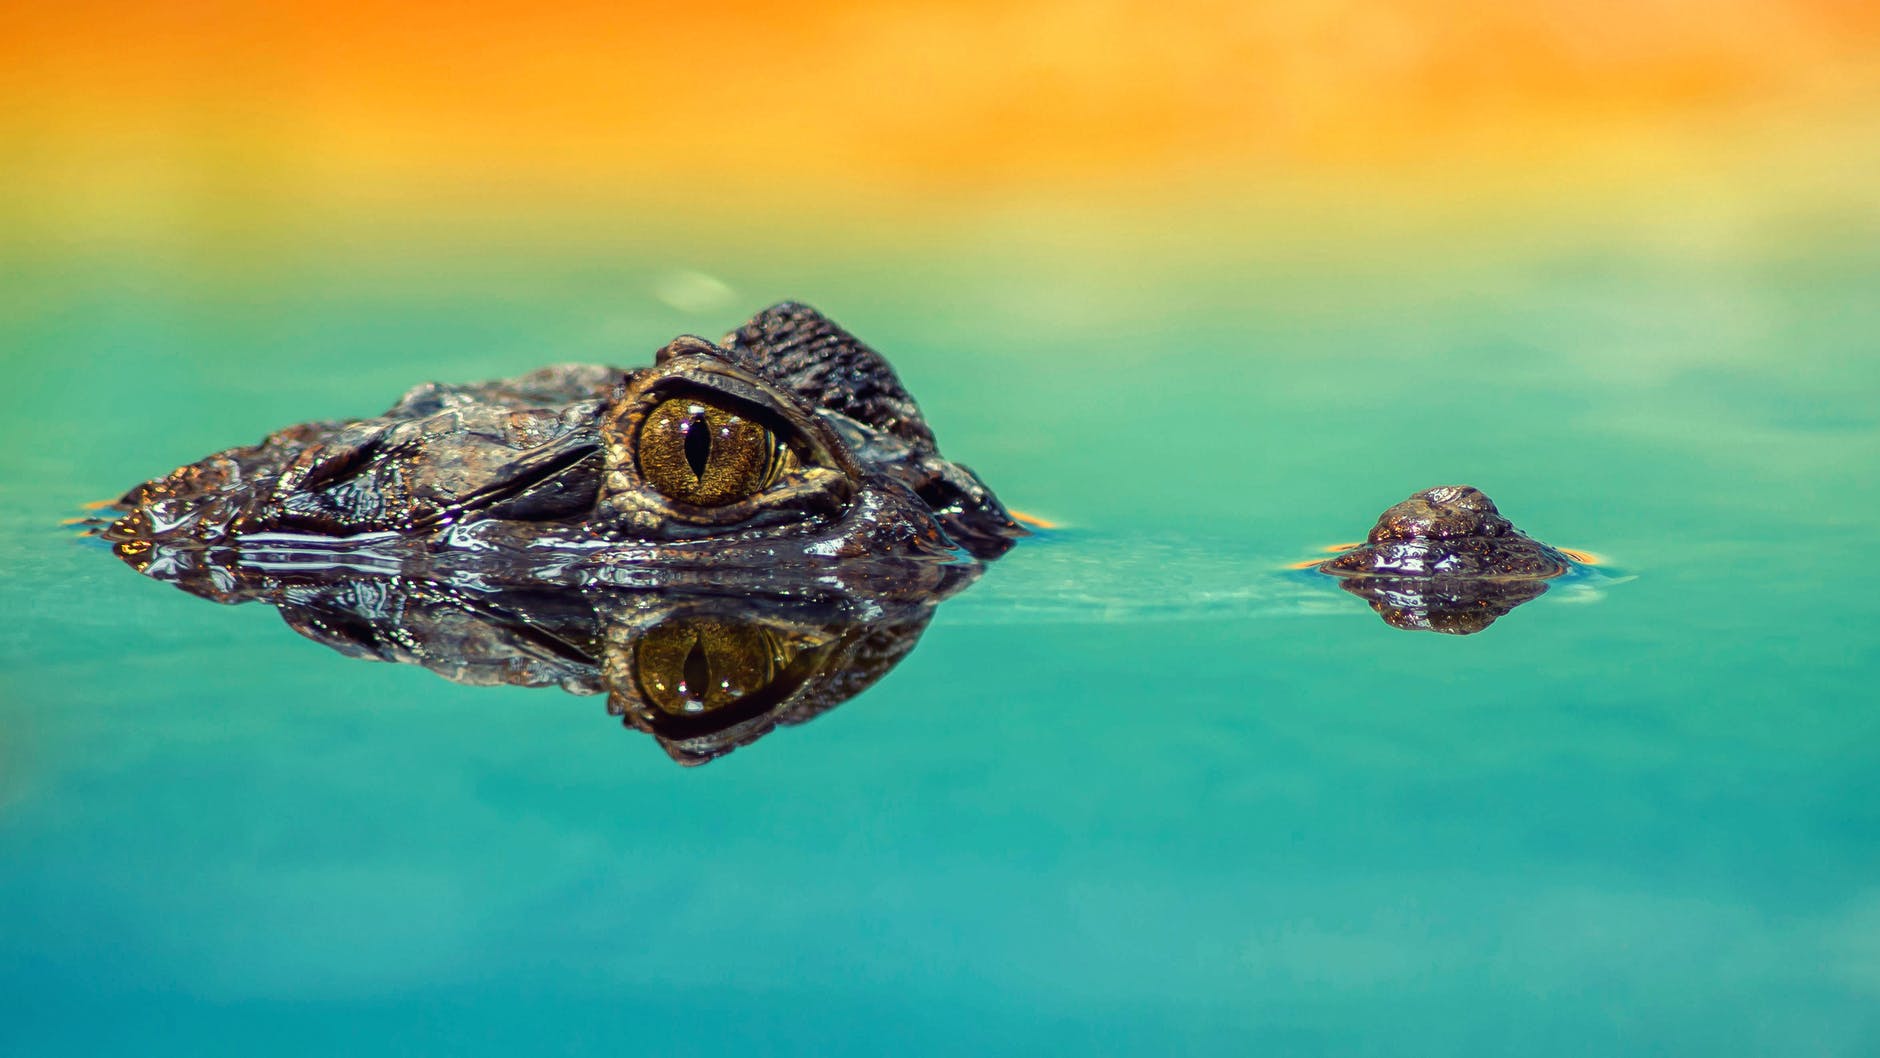 Crocodile emerging from water